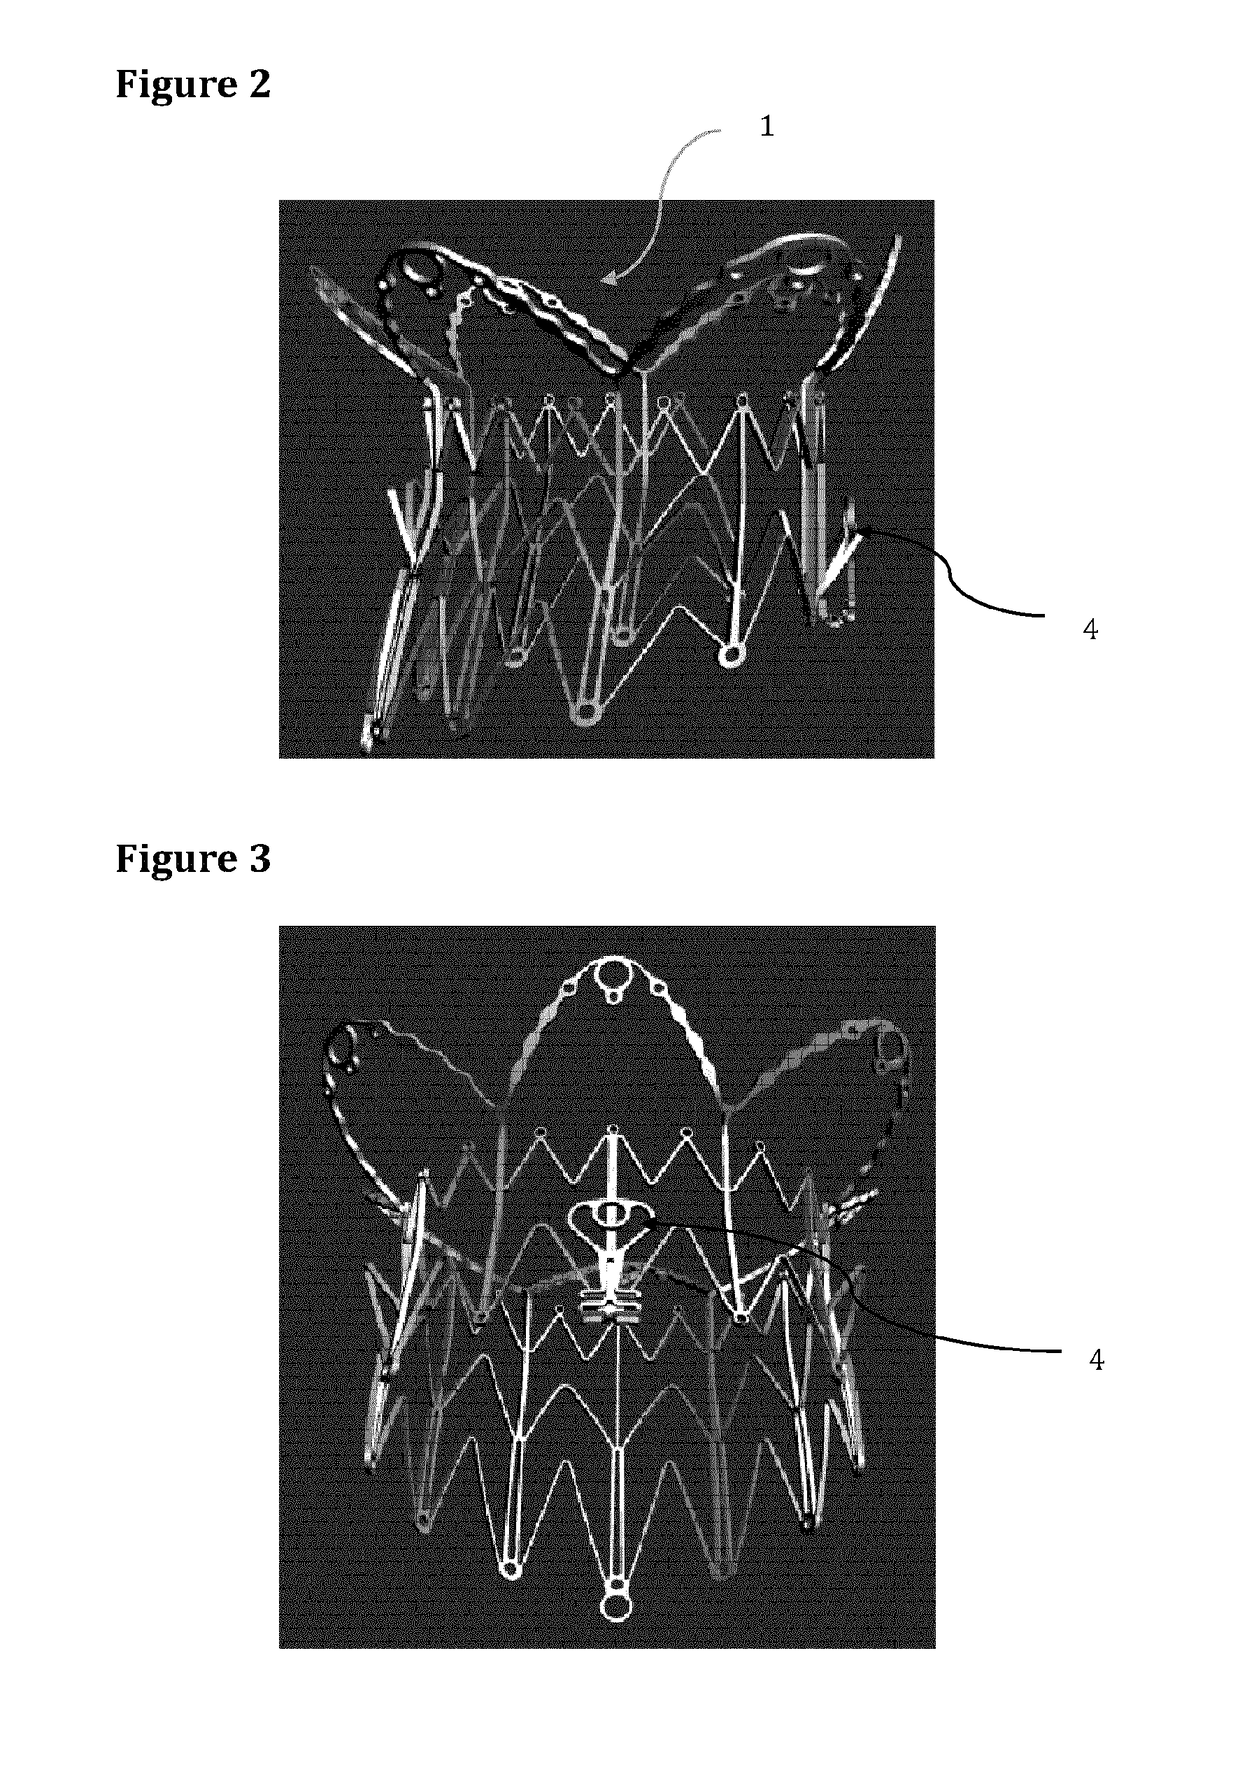 Atrio-Ventricular Valve Stent with Native Leaflet Grasping and Holding Mechanism